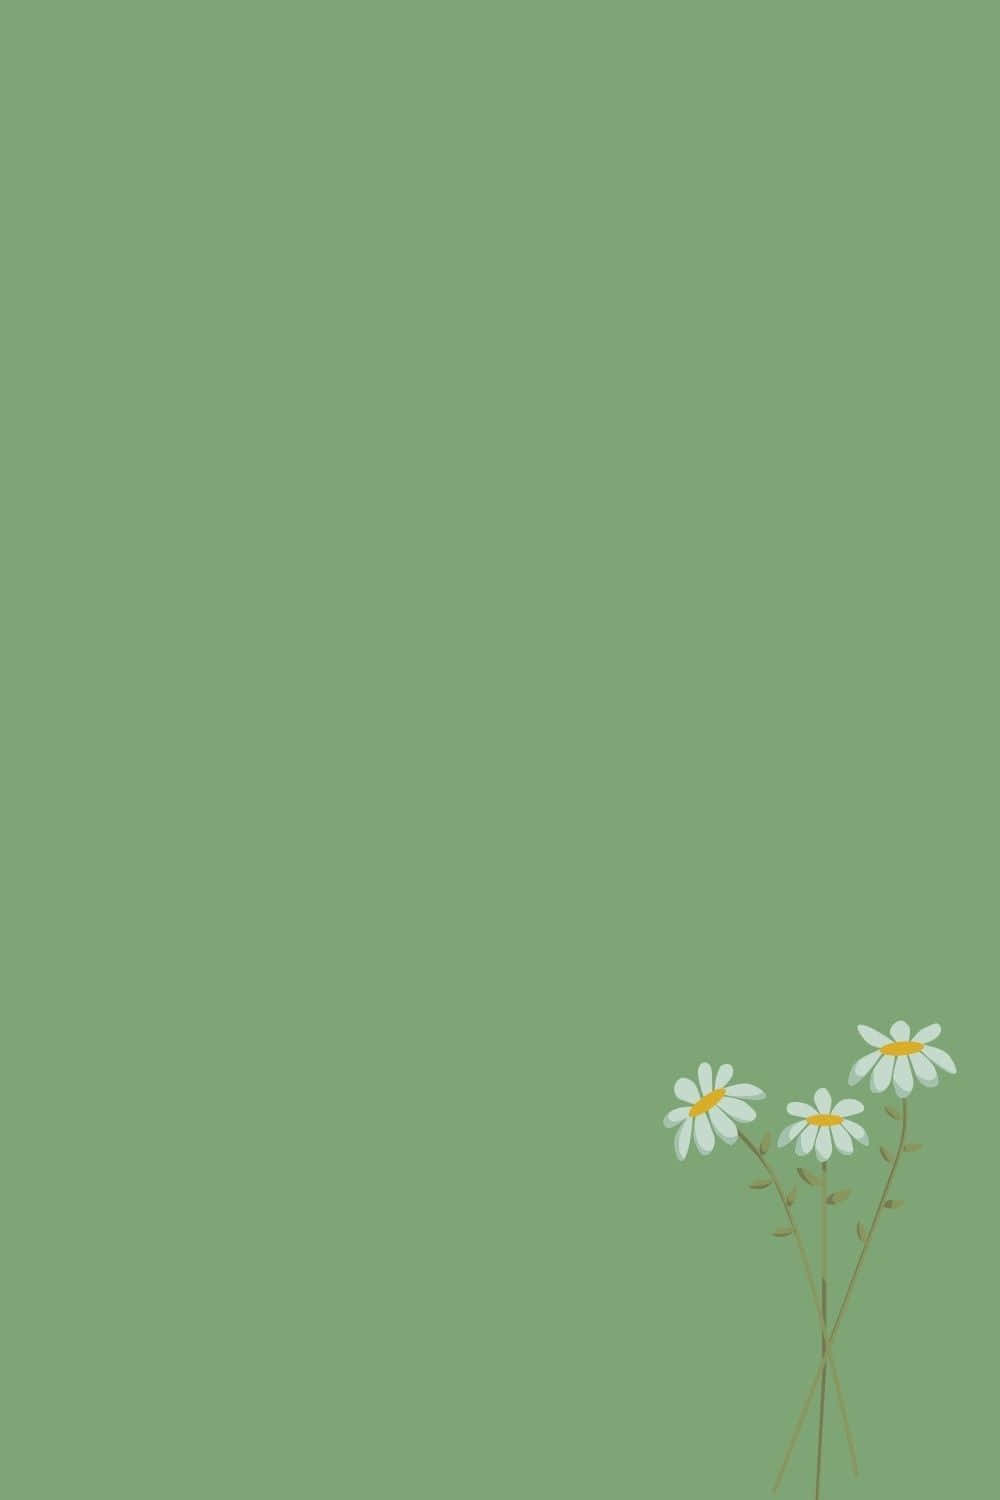 White Common Daisy Against A Cute Sage Green Backdrop Background